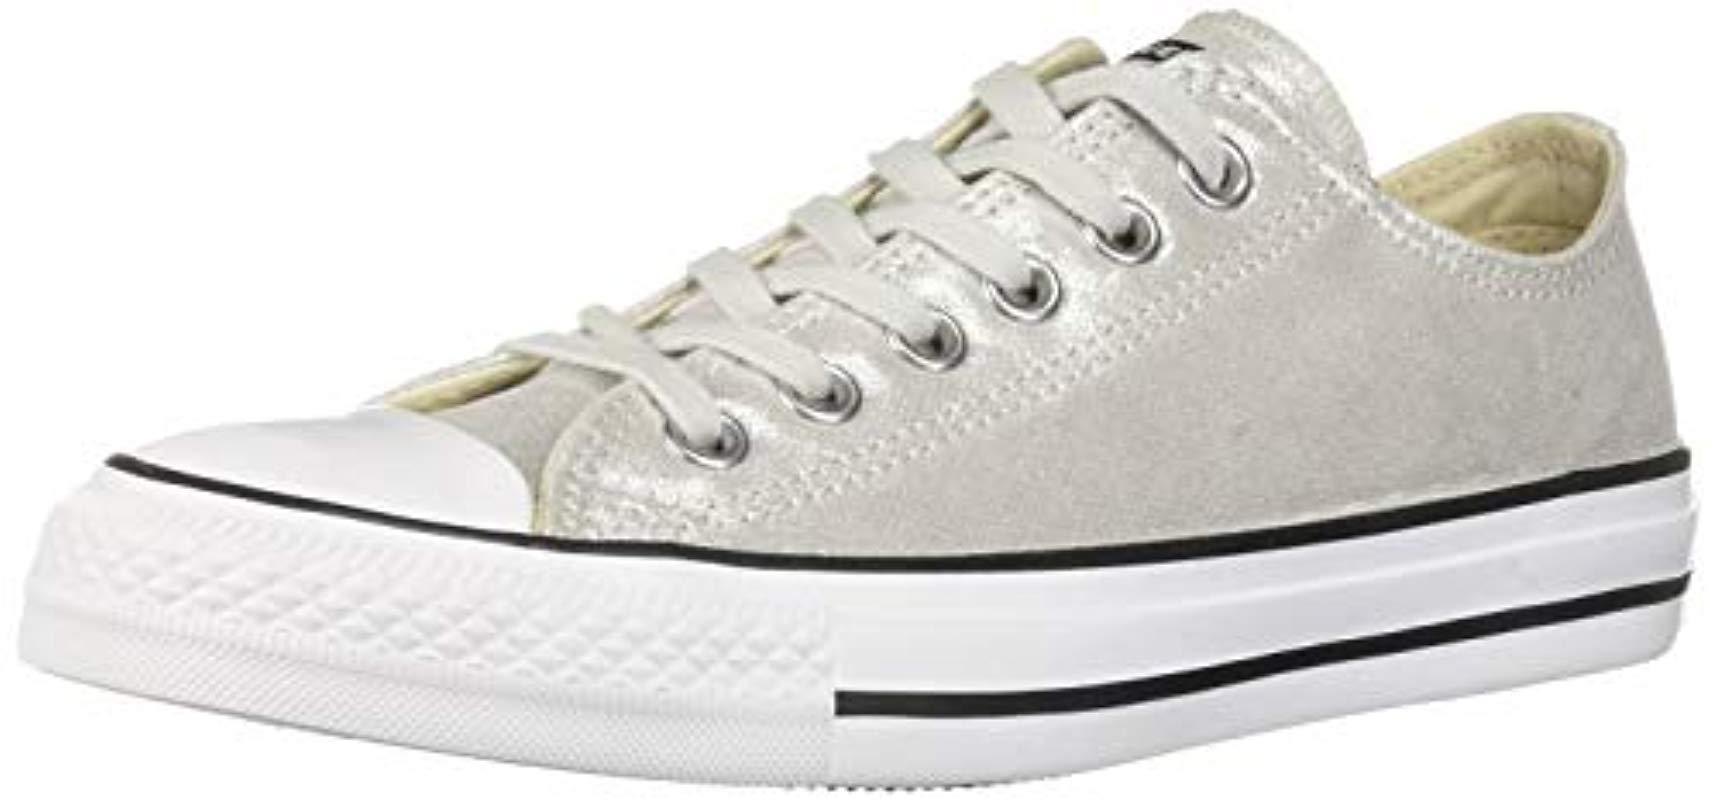 white shimmer converse